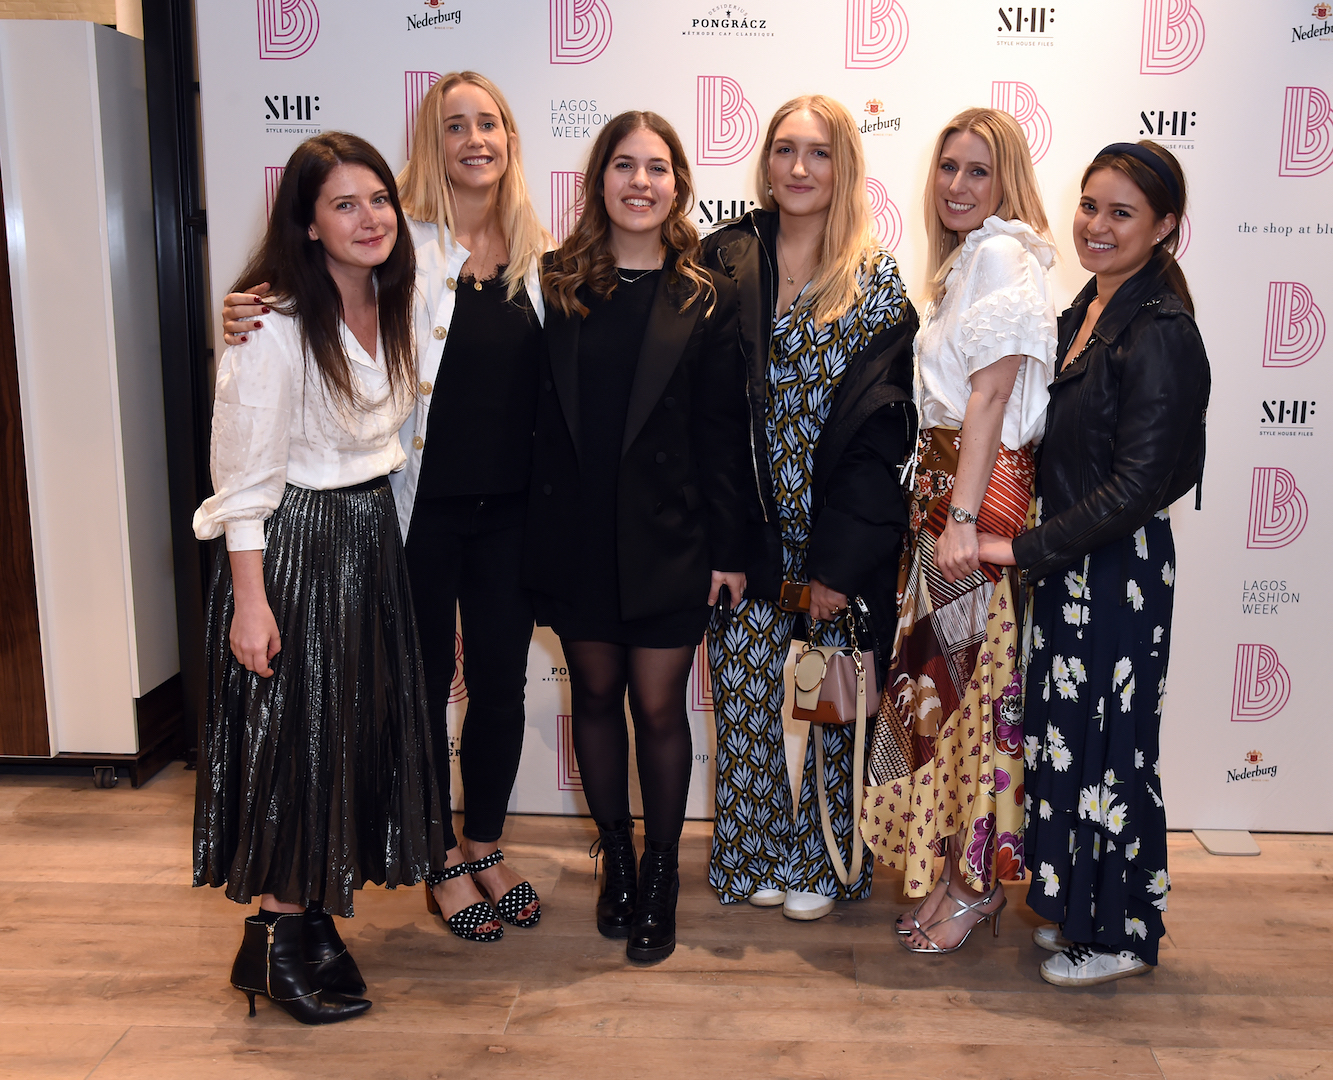 Inside The Lagos Fashion Week “Between Us” Launch at The Shop at Bluebird London